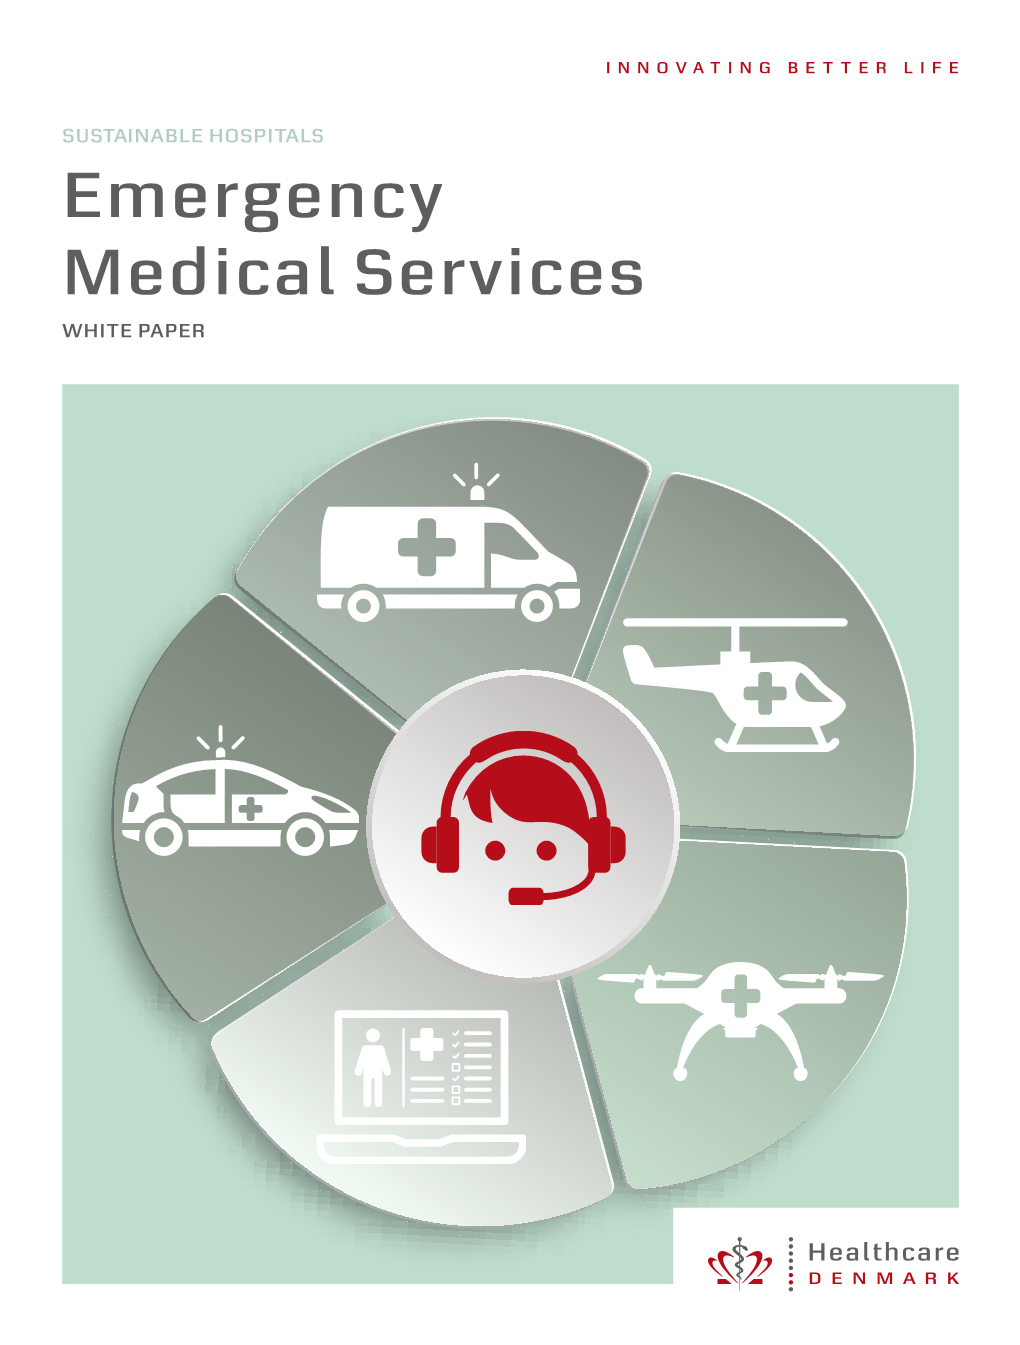 Emergency Medical Services WHITE PAPER SUSTAINABLE HOSPITALS Emergency Medical Services